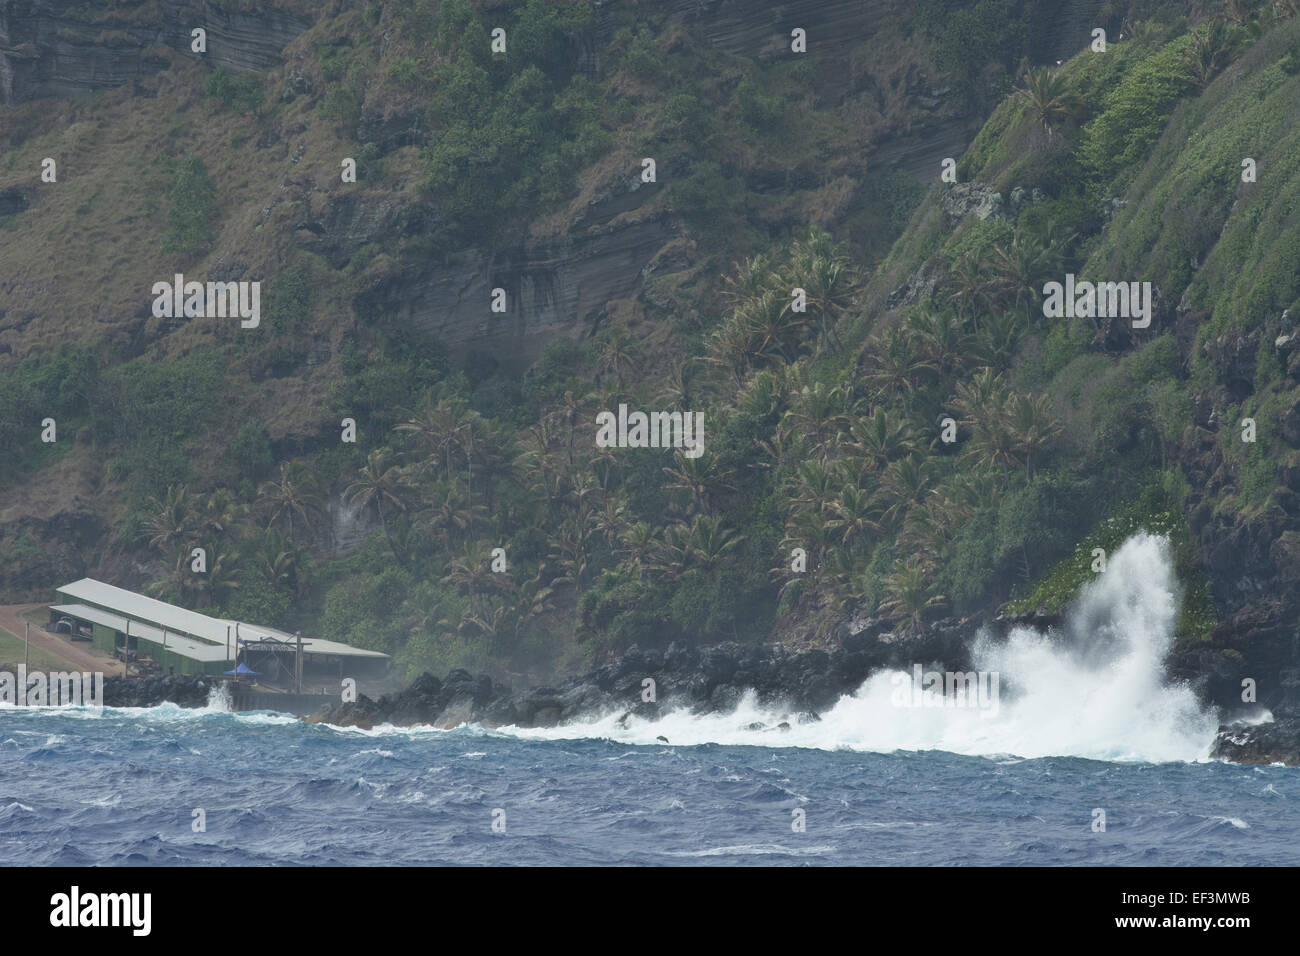 Pitcairn Islands, Pitcairn. Coastal view of rugged volcanic shore. Crashing waves around the boathouse (L) and landing site. Stock Photo